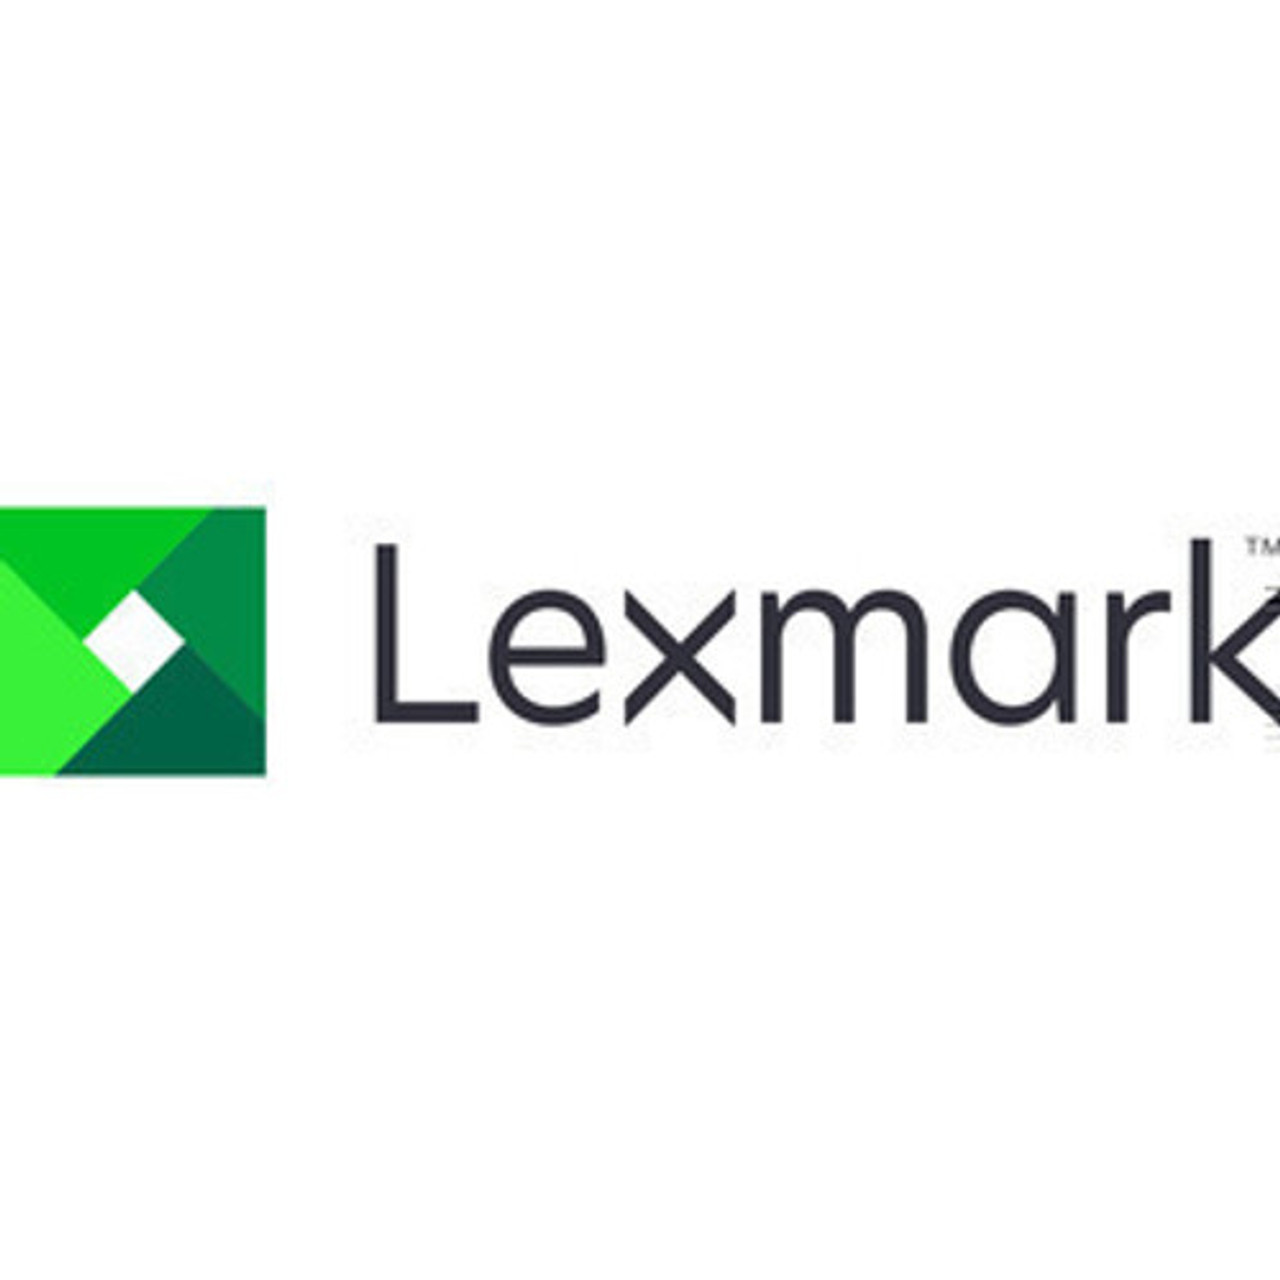 Lexmark 5 YEAR PARTS ONLY - MS331 - 2371742